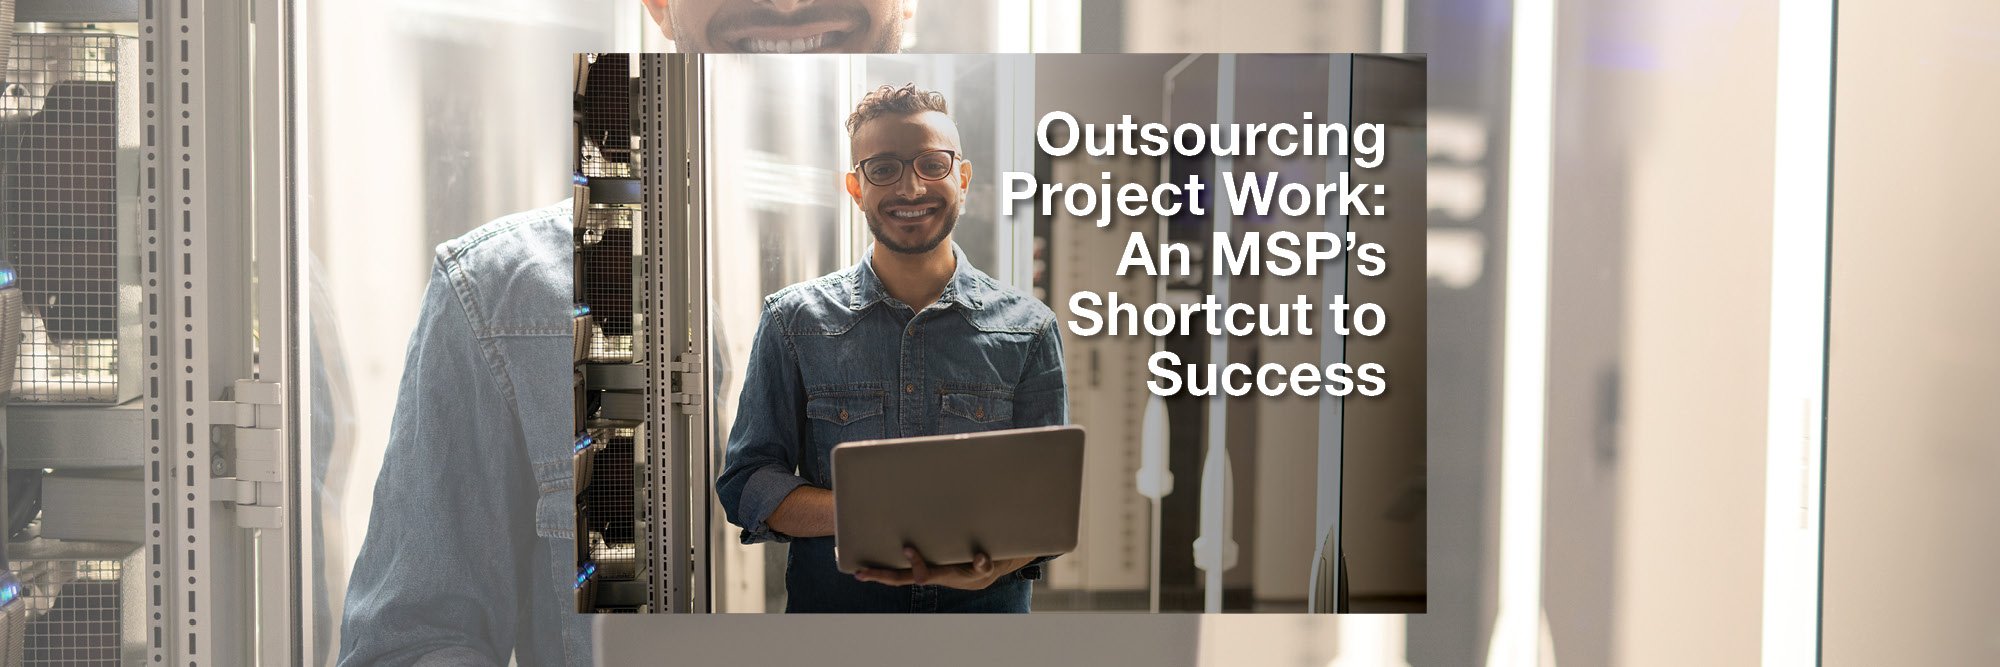 Outsourcing Project Work: An MSP’s Shortcut to Success